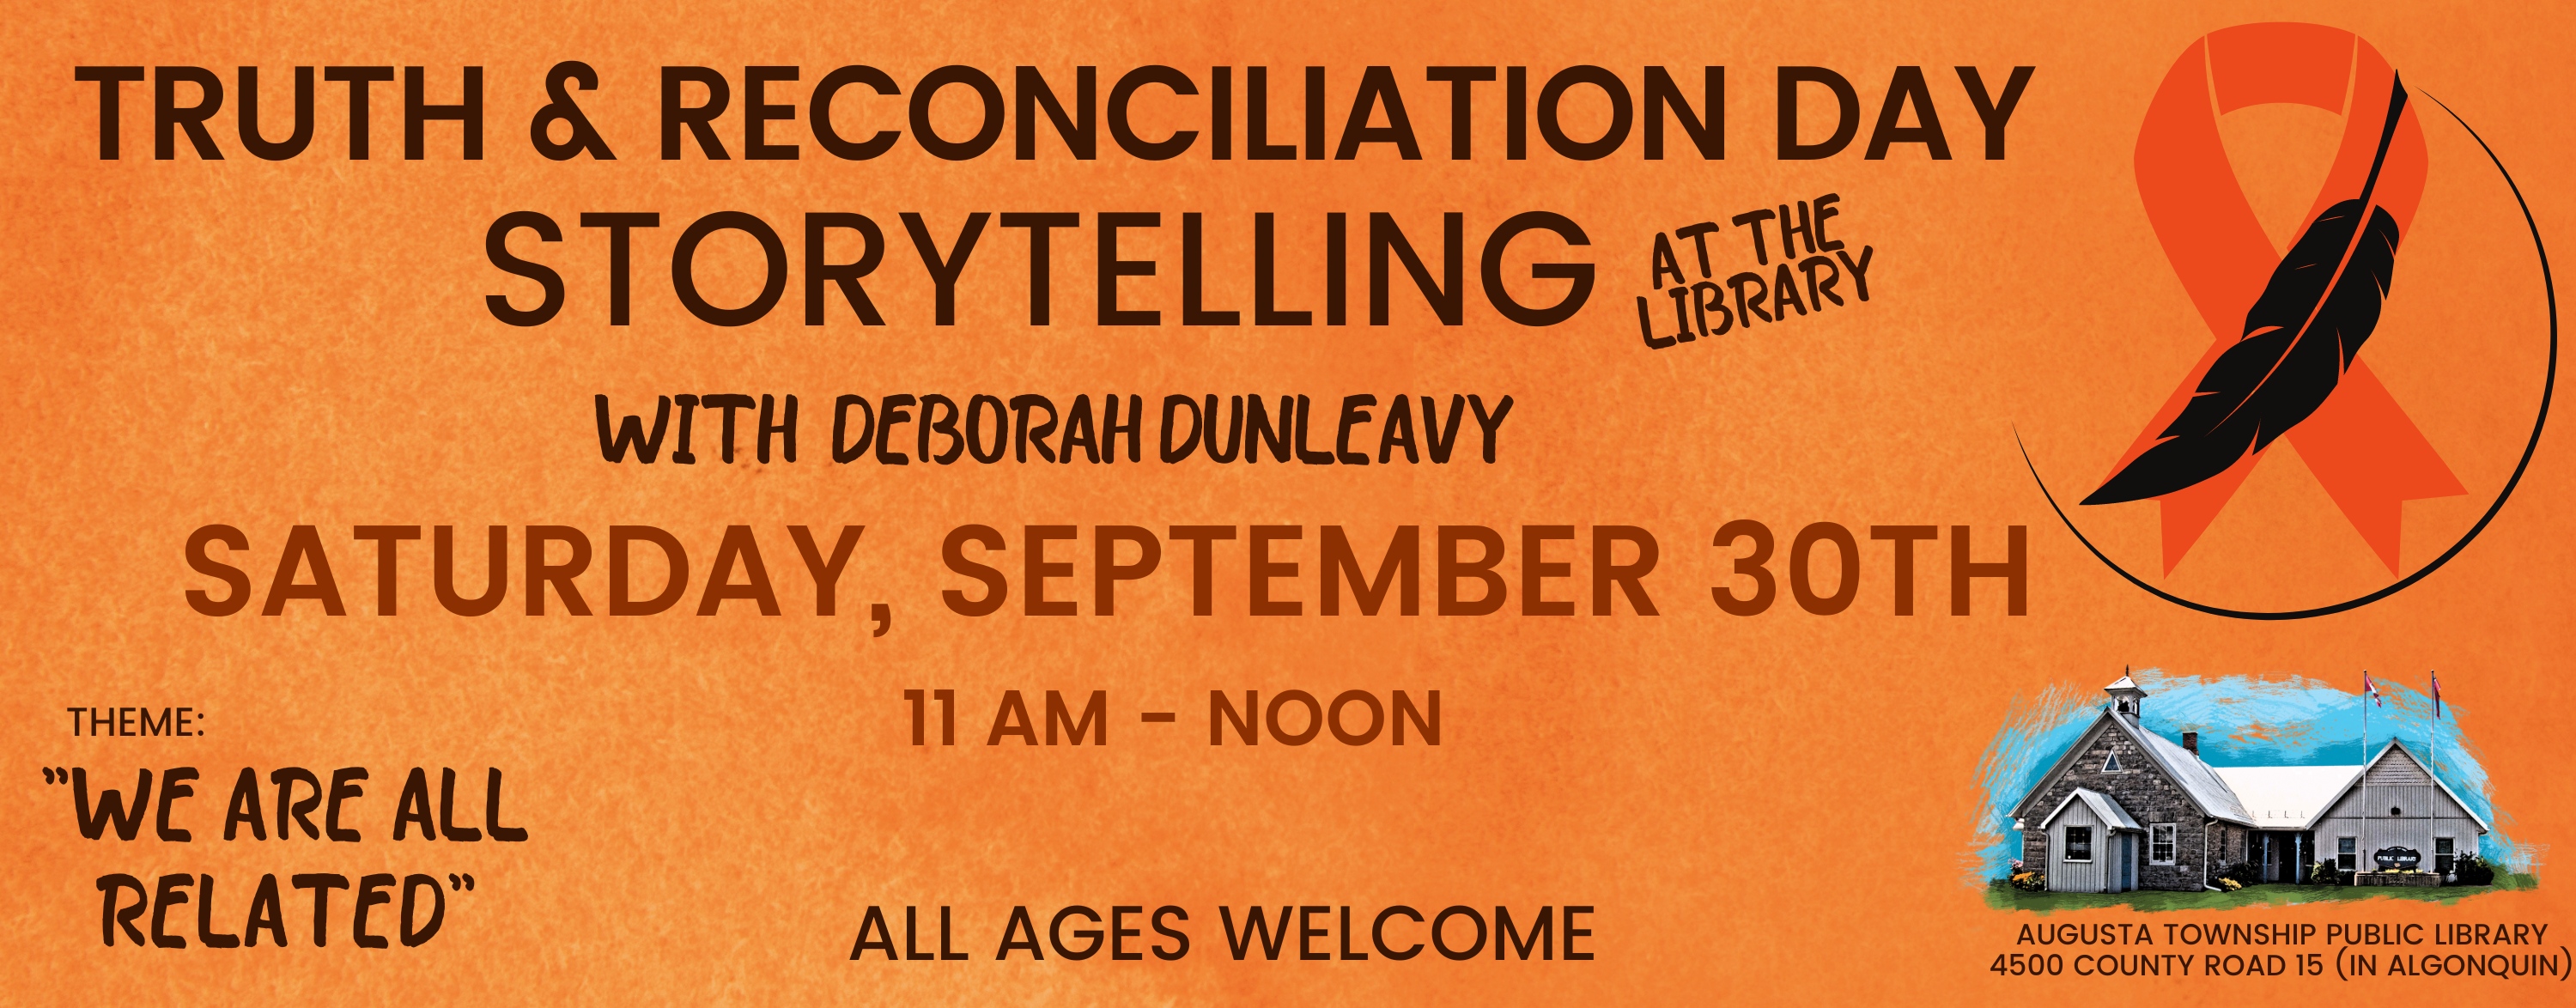 truth & Reconciliation day story time at the library september 30, 11-12pm